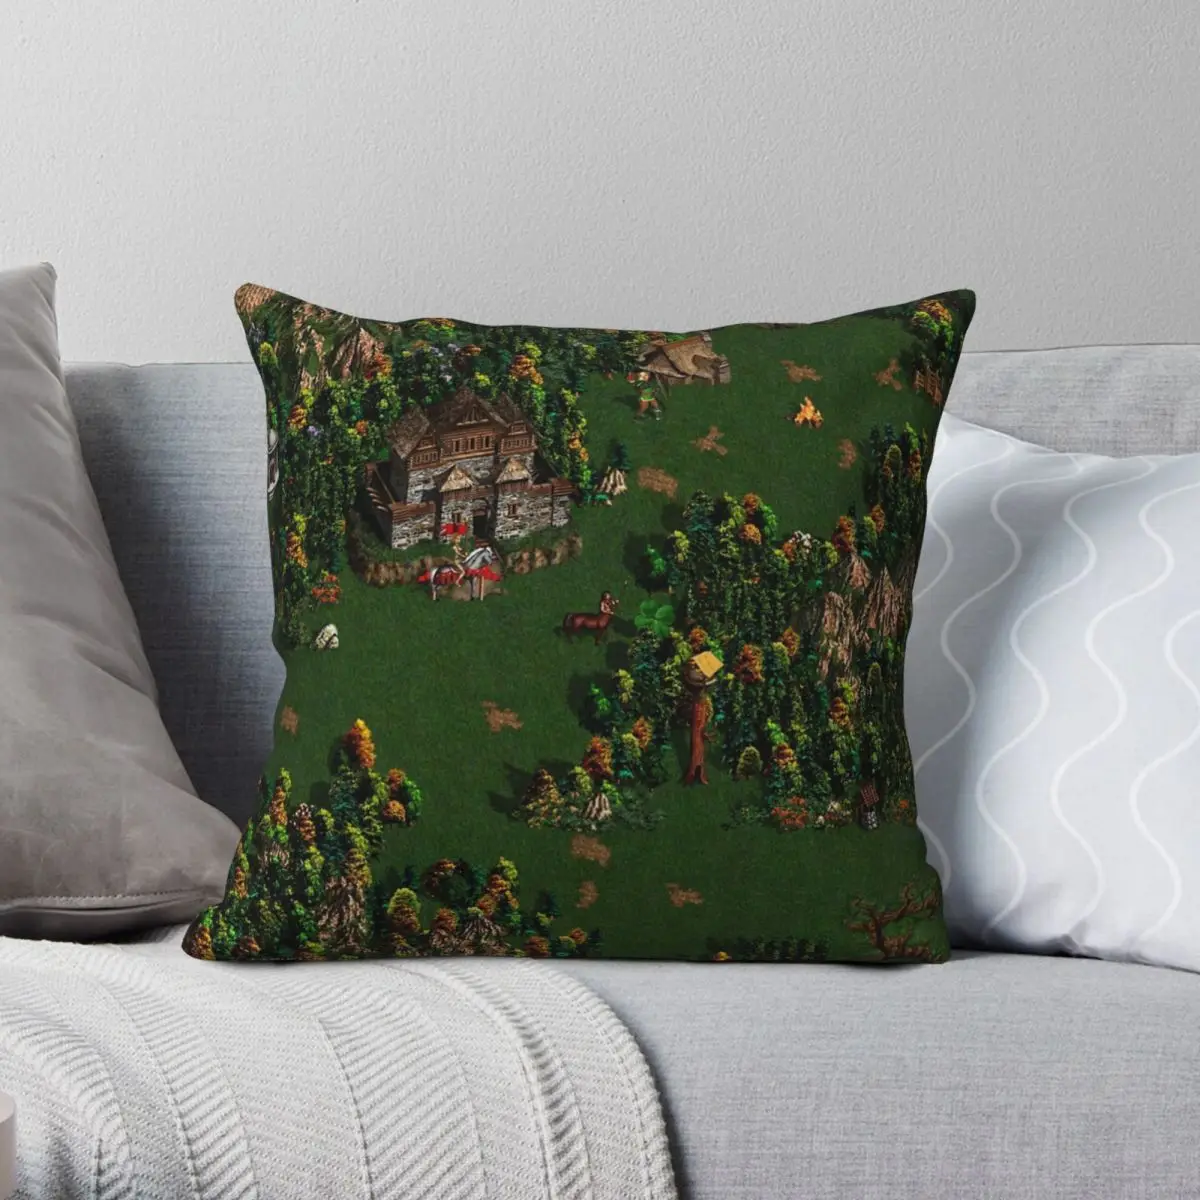 

Heroes Of Might And Magic III Square Pillowcase Polyester Linen Velvet Printed Zip Decor Bed Cushion Cover